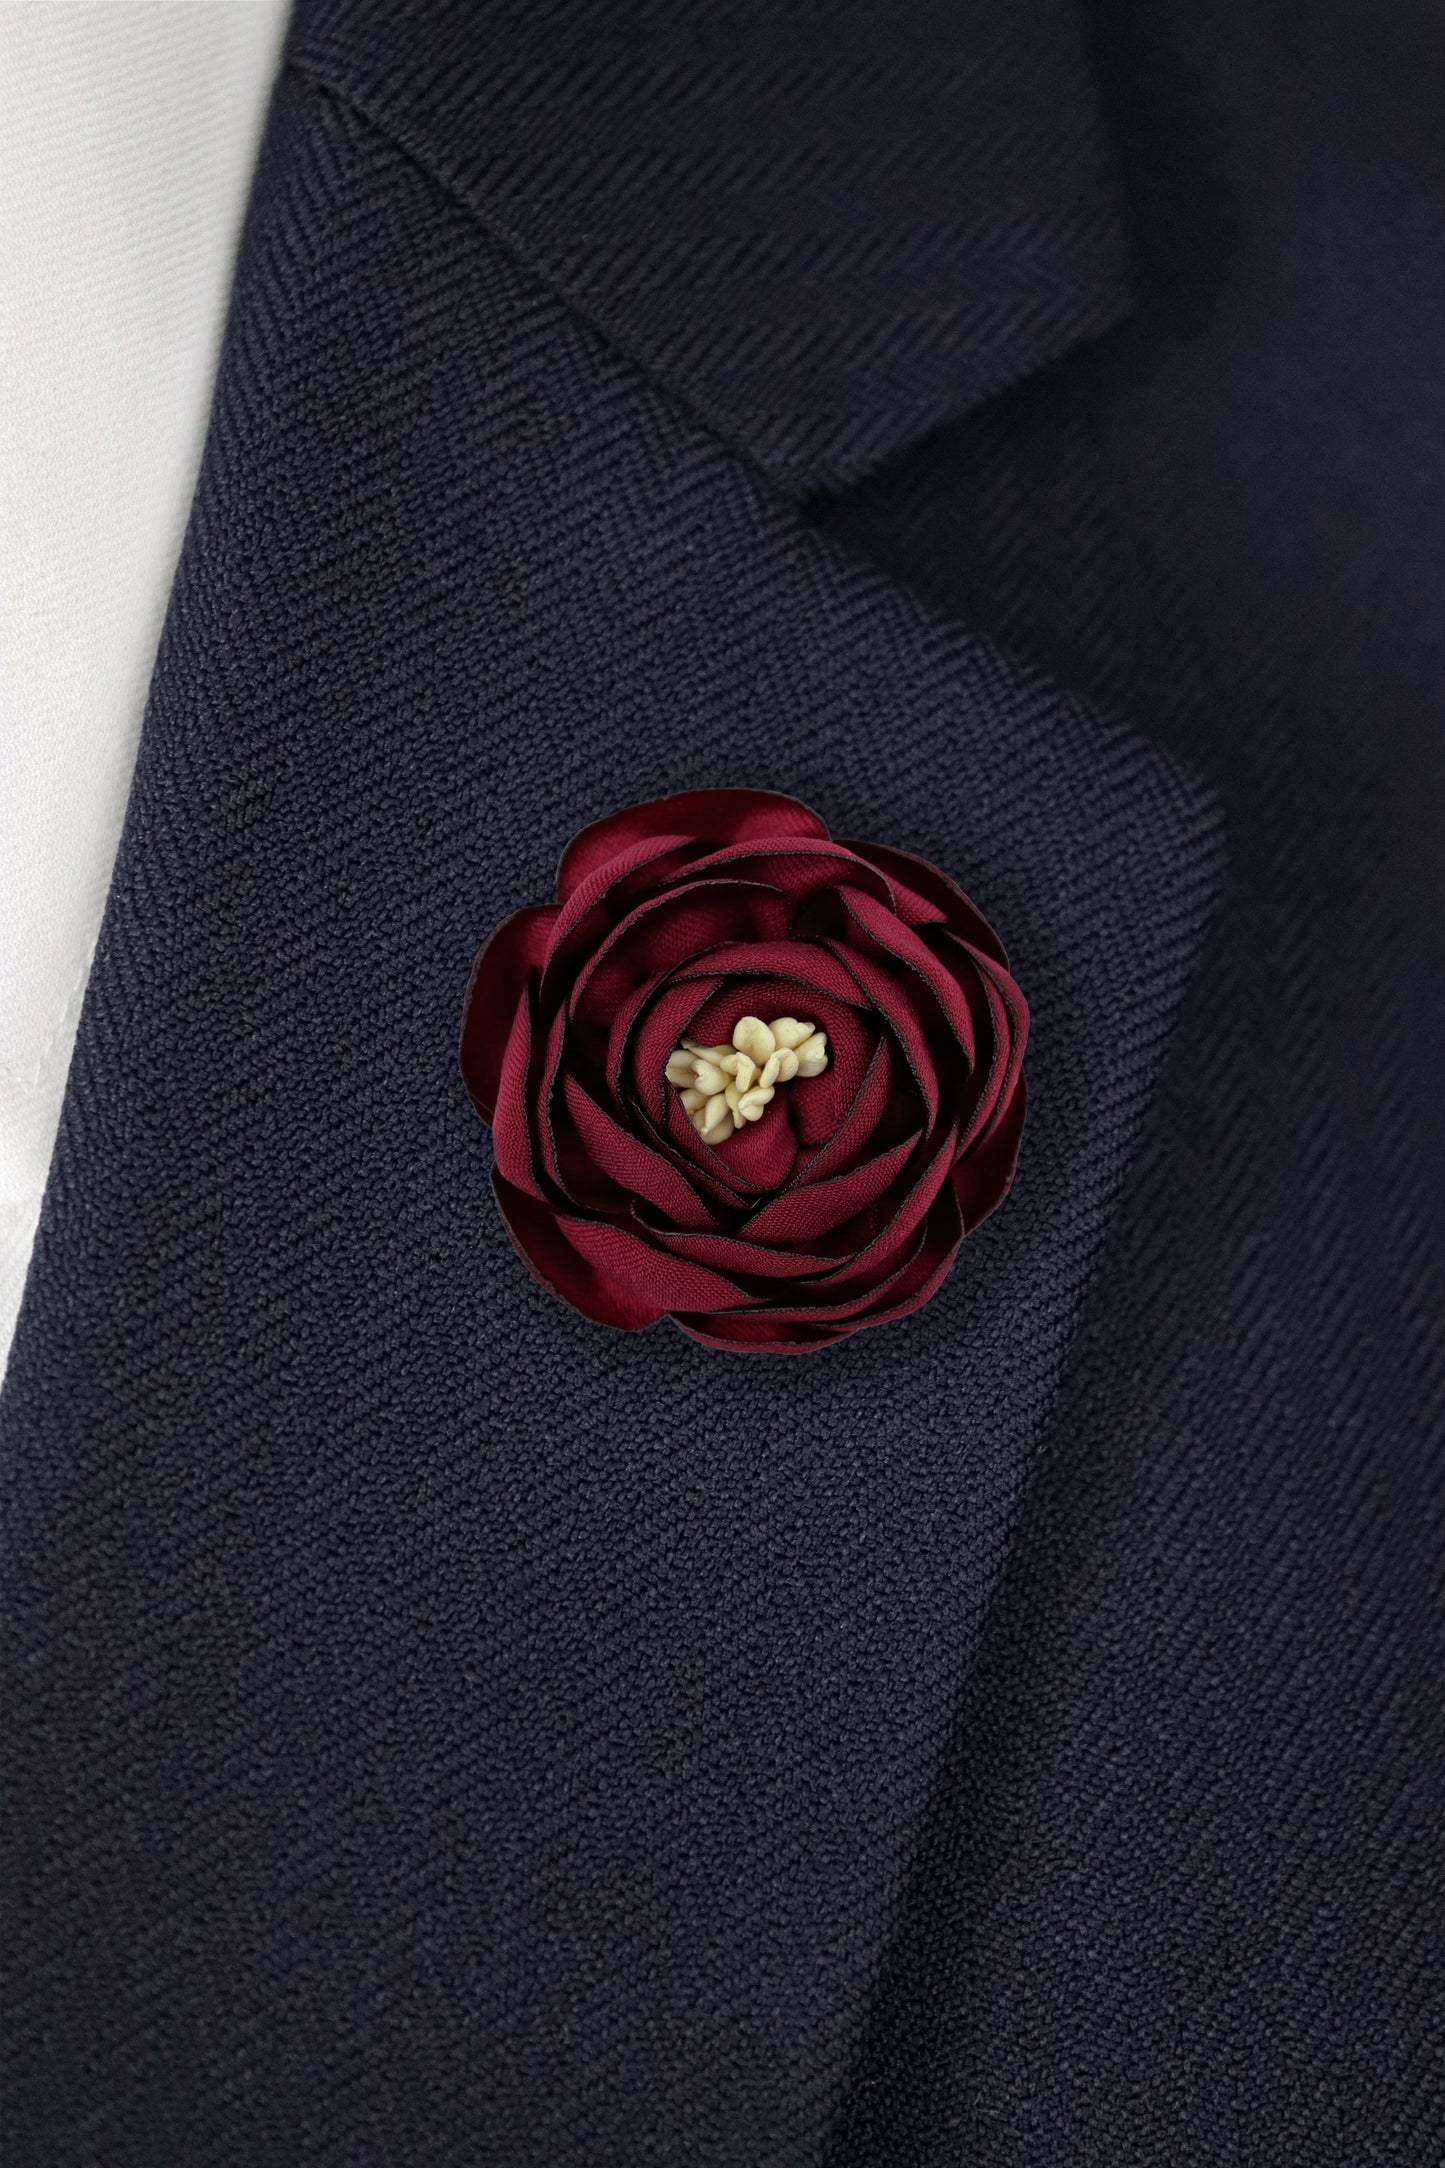 Flower Lapel Pin - Red